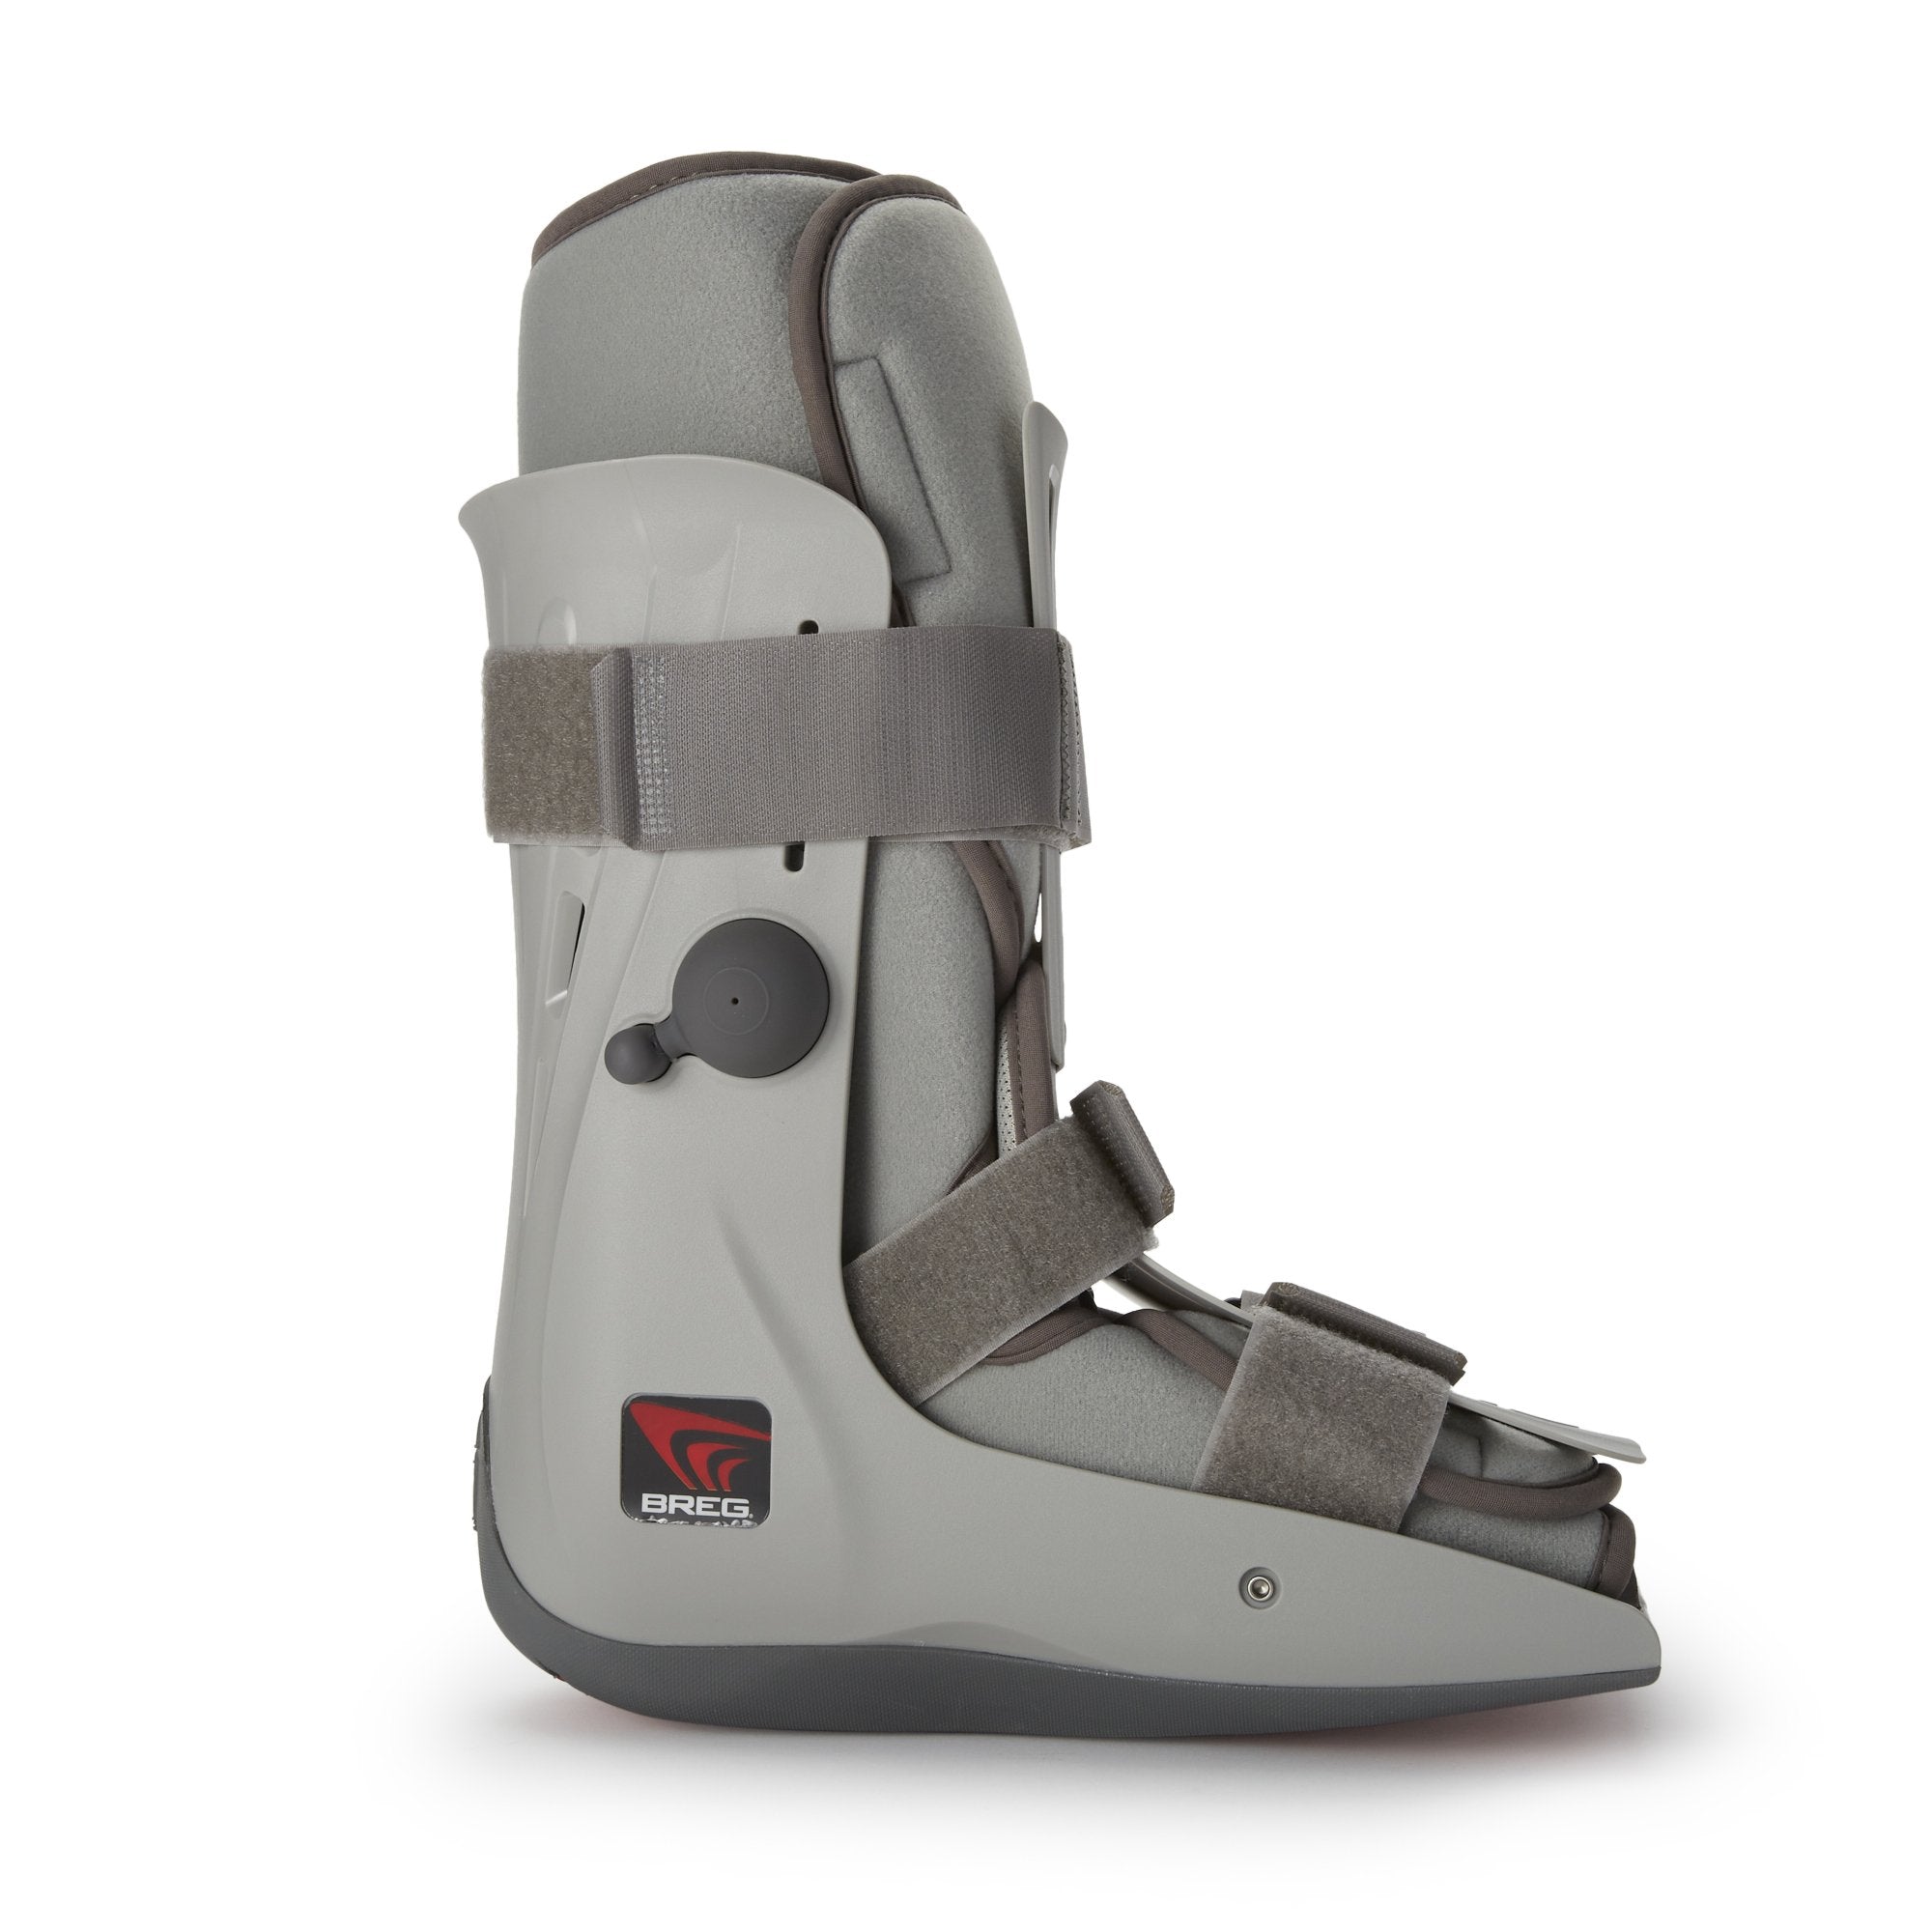 Walker Boot Breg® Genesis Non-Pneumatic Large Left or Right Foot Adult